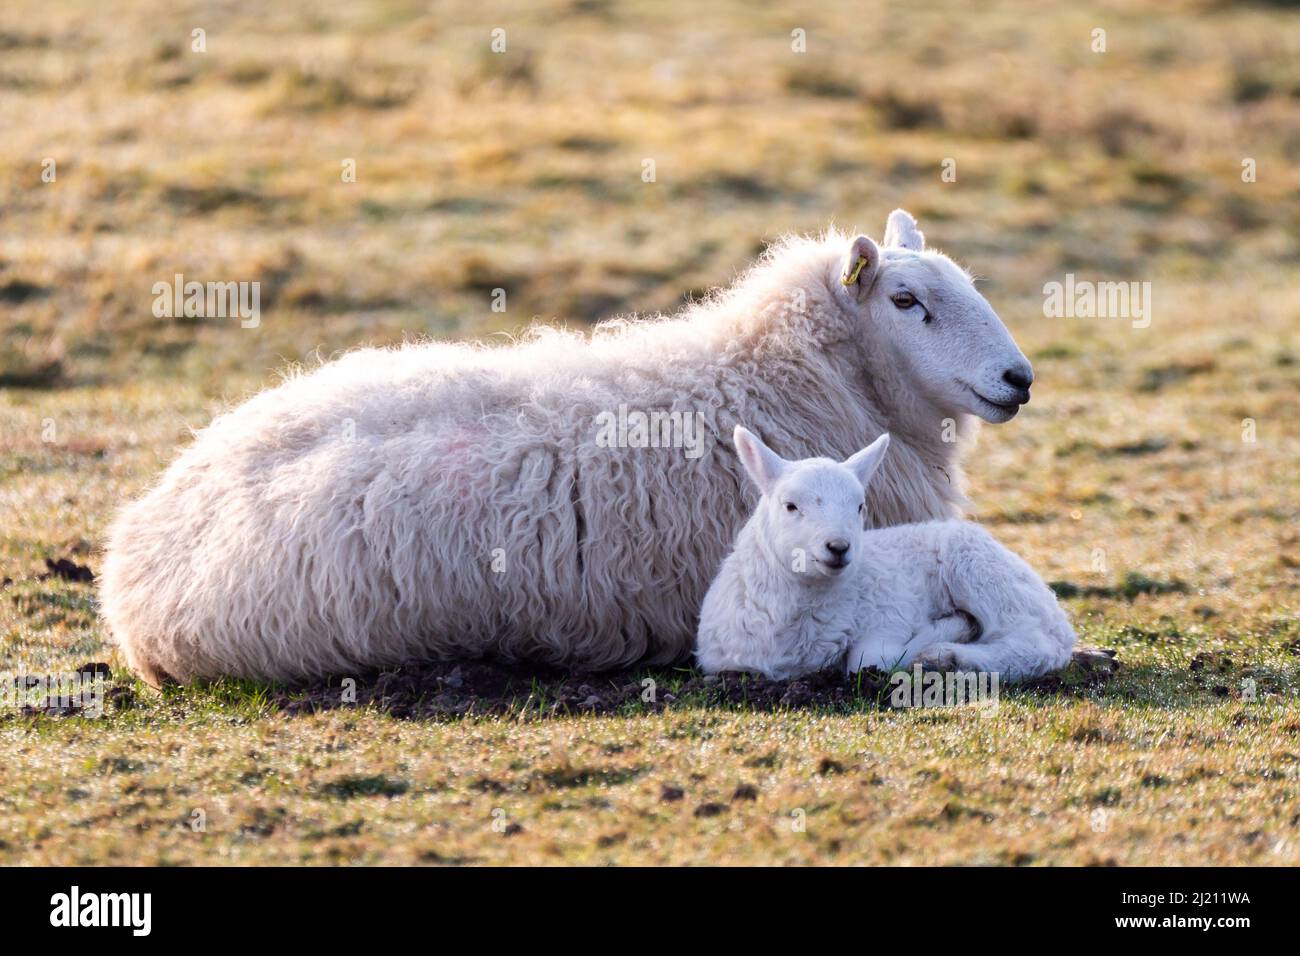 Near Tynygraig, Ceredigion, Wales, UK. 29th March 2022  UK Weather: A Spring lamb lying next to its mother in the morning sunshine as temperatures feel a lot cooler this morning near Tynygraig in mid Wales. © Ian Jones/Alamy Live News Stock Photo